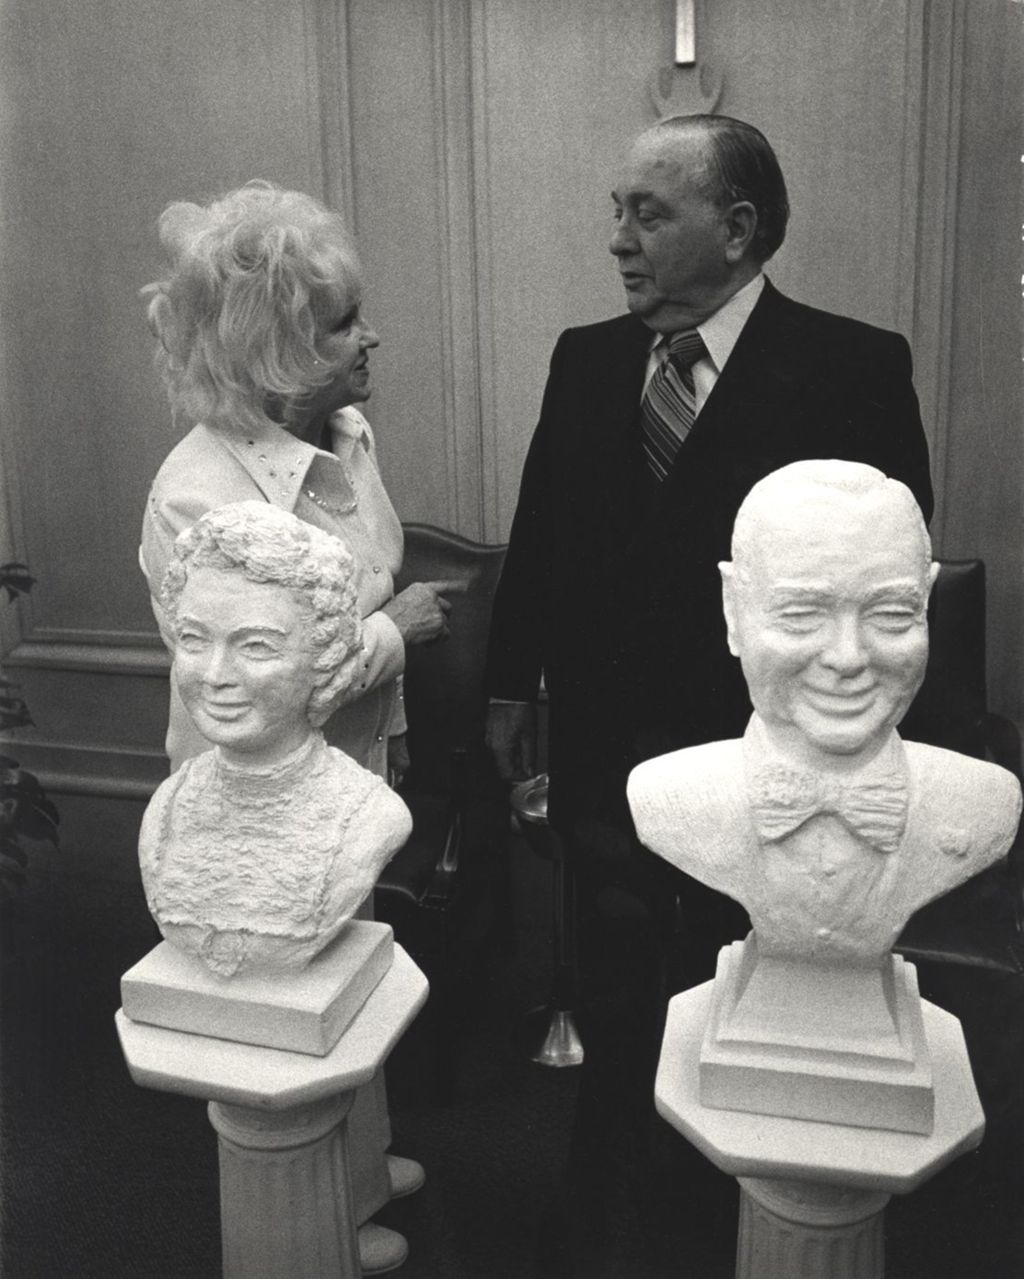 Sculptor Eleanor Root presenting Richard J. Daley with portrait busts